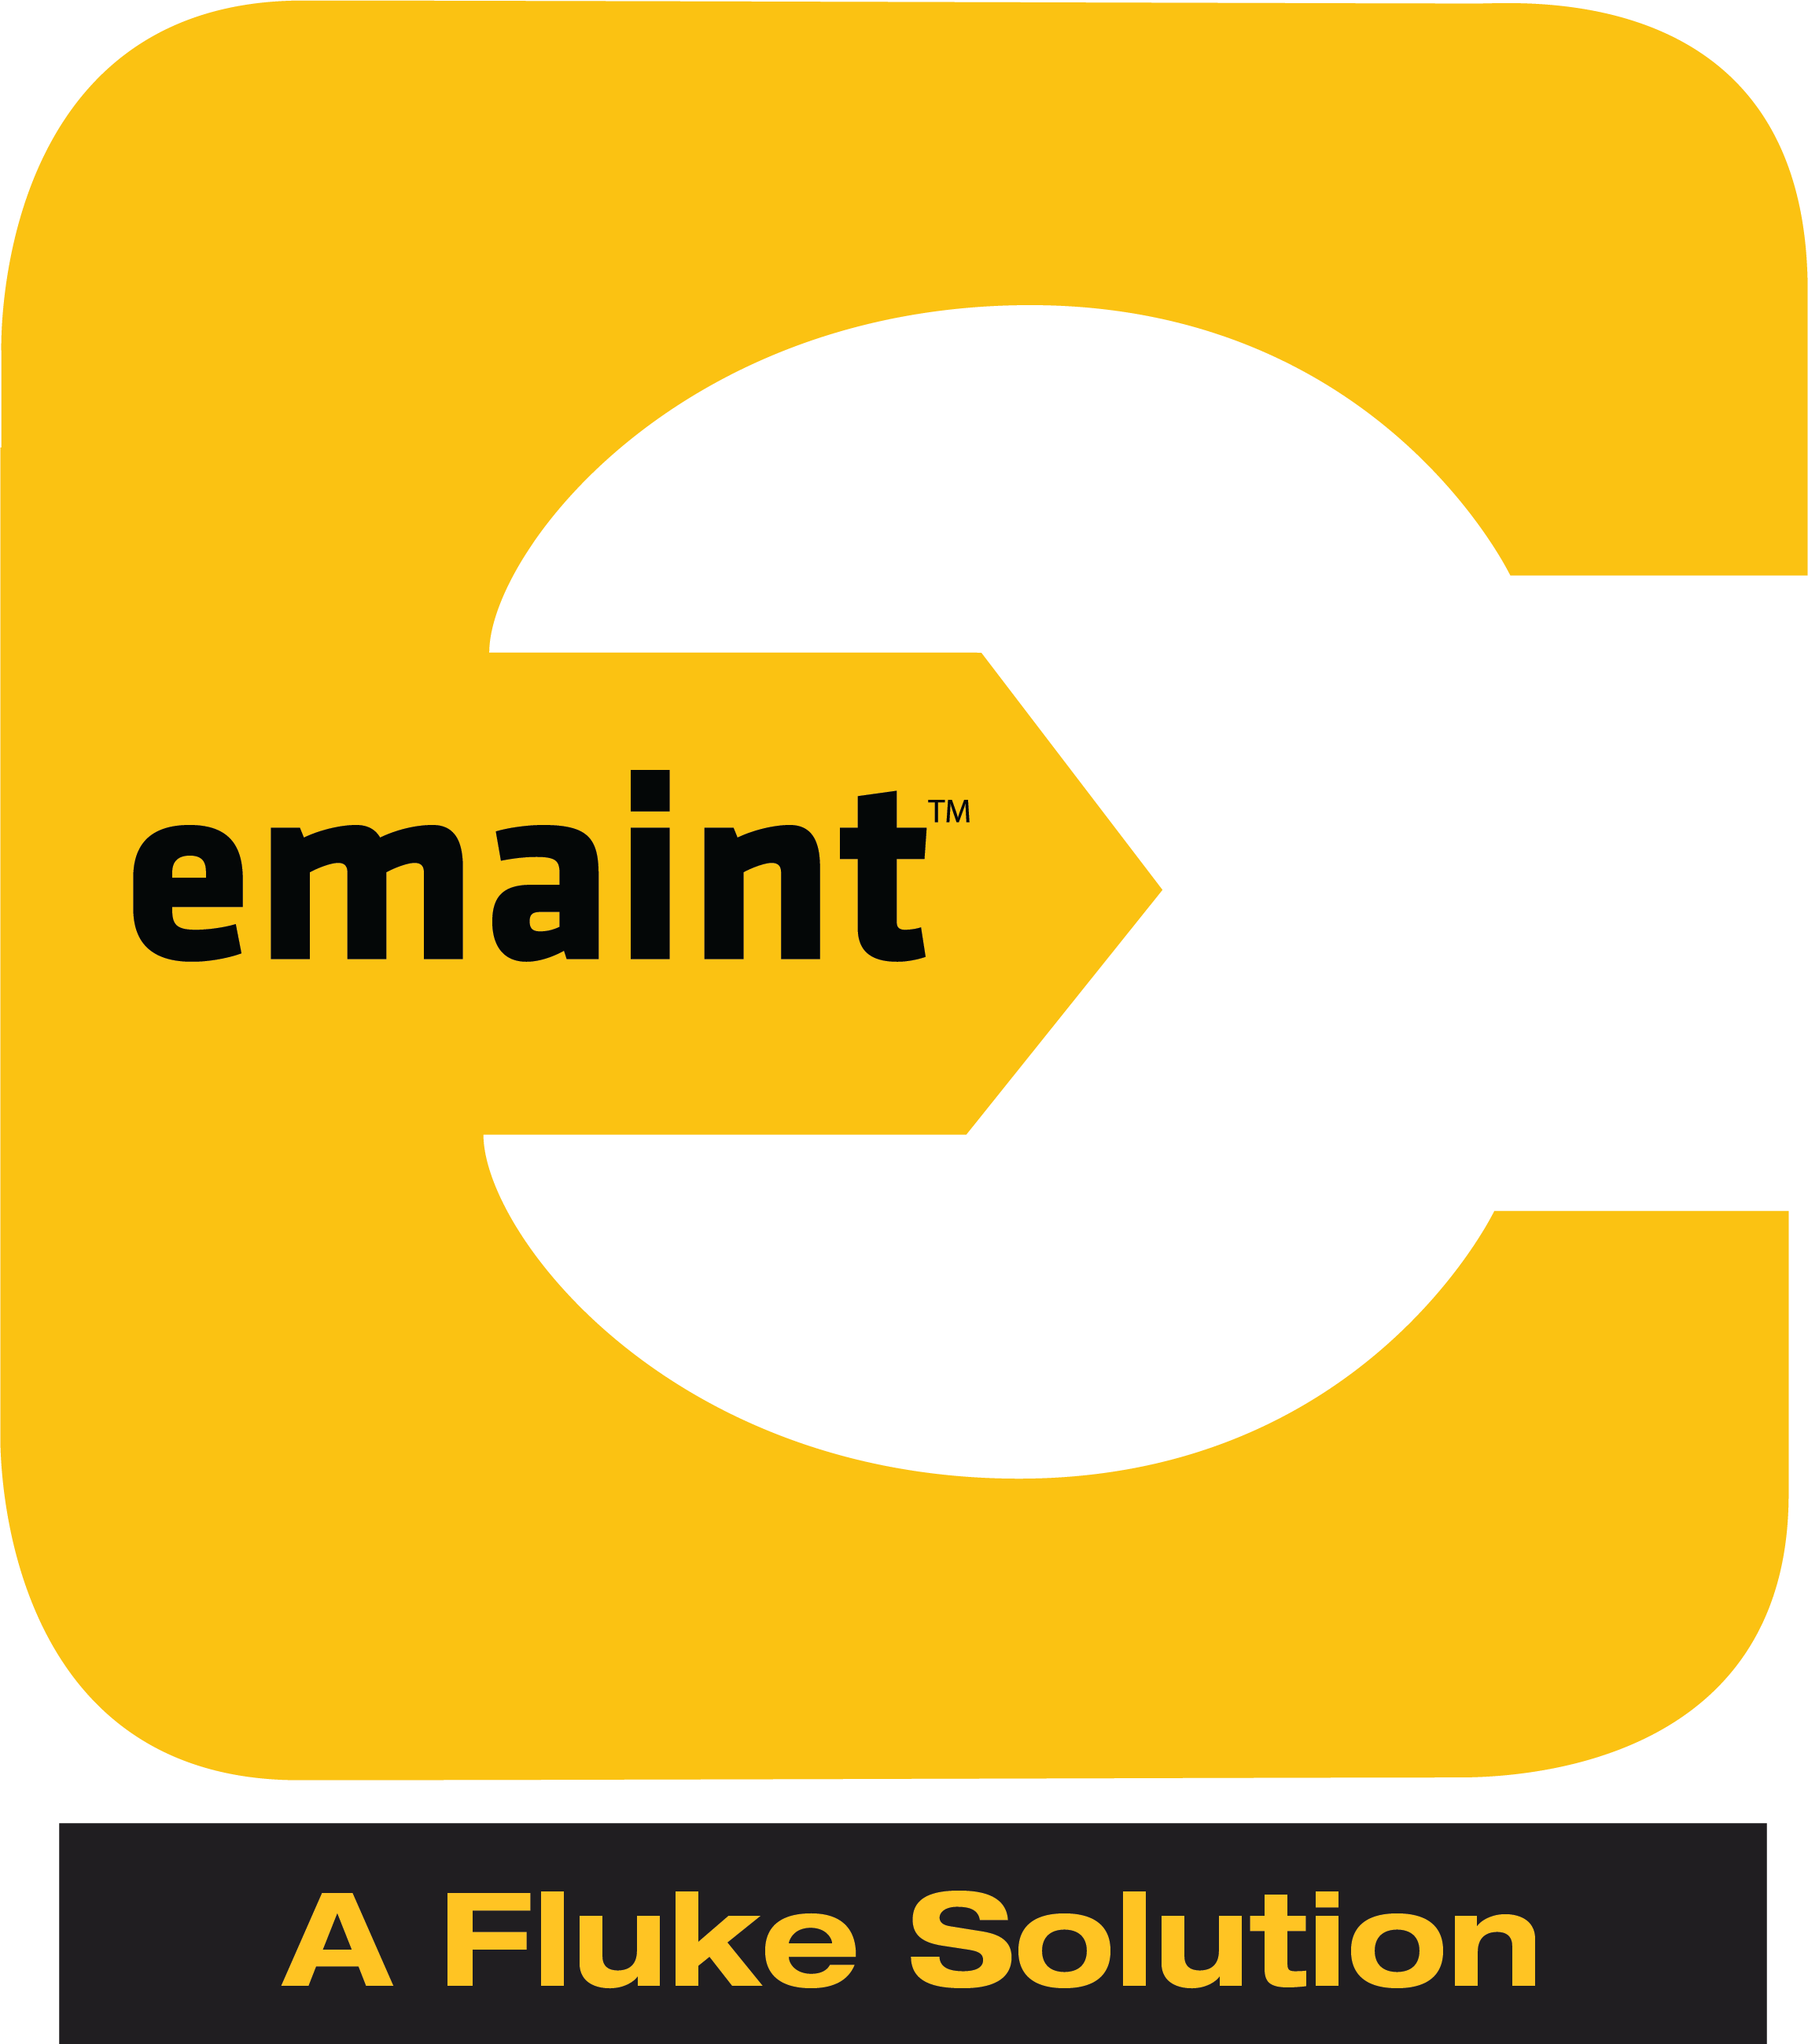 emaint